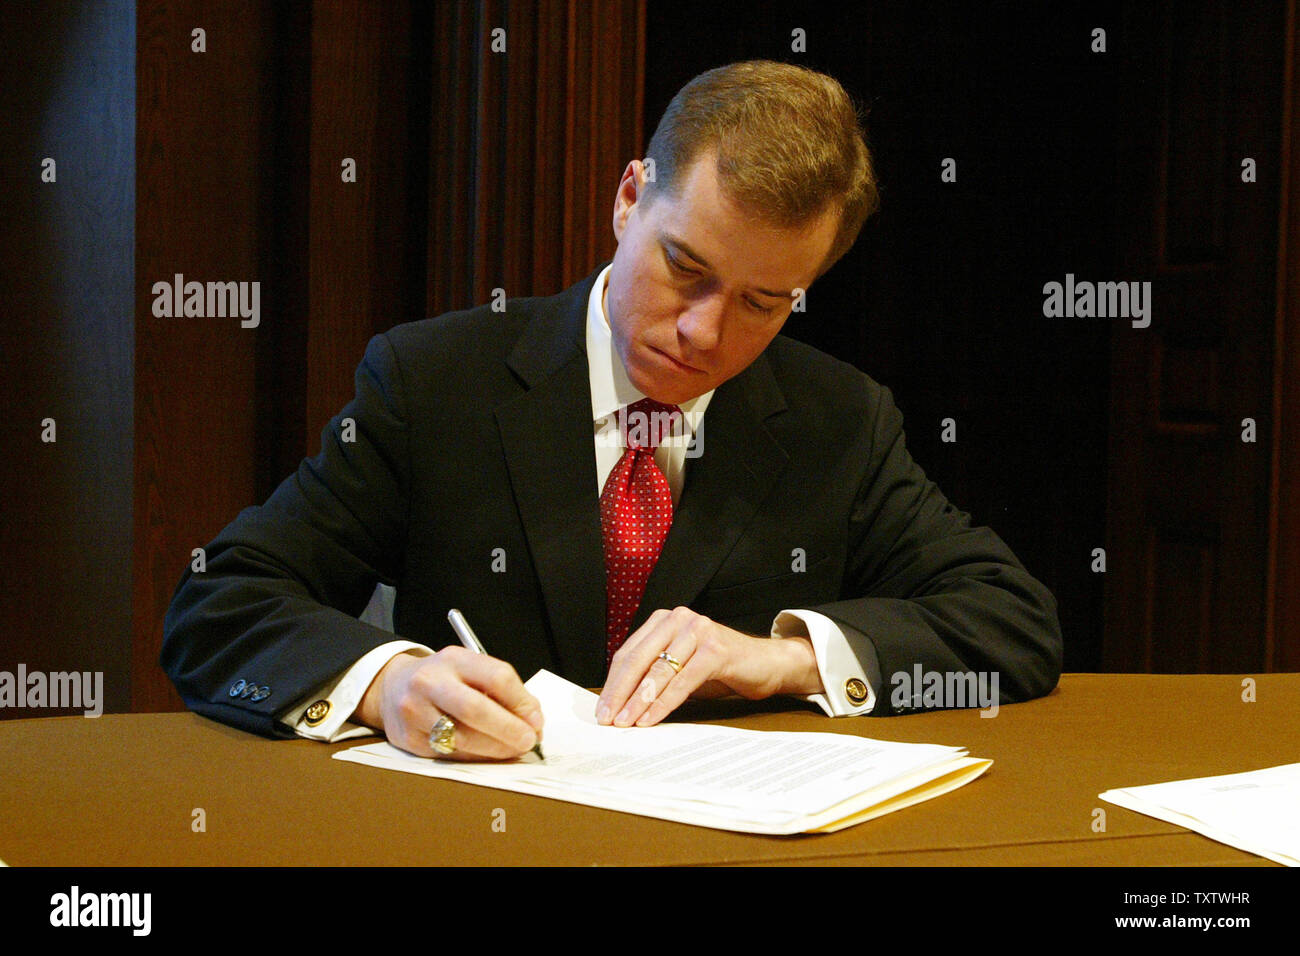 Mo. Gov. Matt Blunt signs his first executive order on his first full day at work in the State Capitol in Jefferson City, Mo on January 11, 2005. Blunt announced the revocation of former Gov. Bob Holden's executive order which sanctioned collective bargaining for state agencies which sought to allow service unions to take money out of the paychecks of state workers. Blunt also announced cost-cutting measures like the closing of the state's Washington, D.C. office, a freeze on the purchase of non-emergency vehicles, cell phones and the purchase and leasing of new office space for state agencies Stock Photo